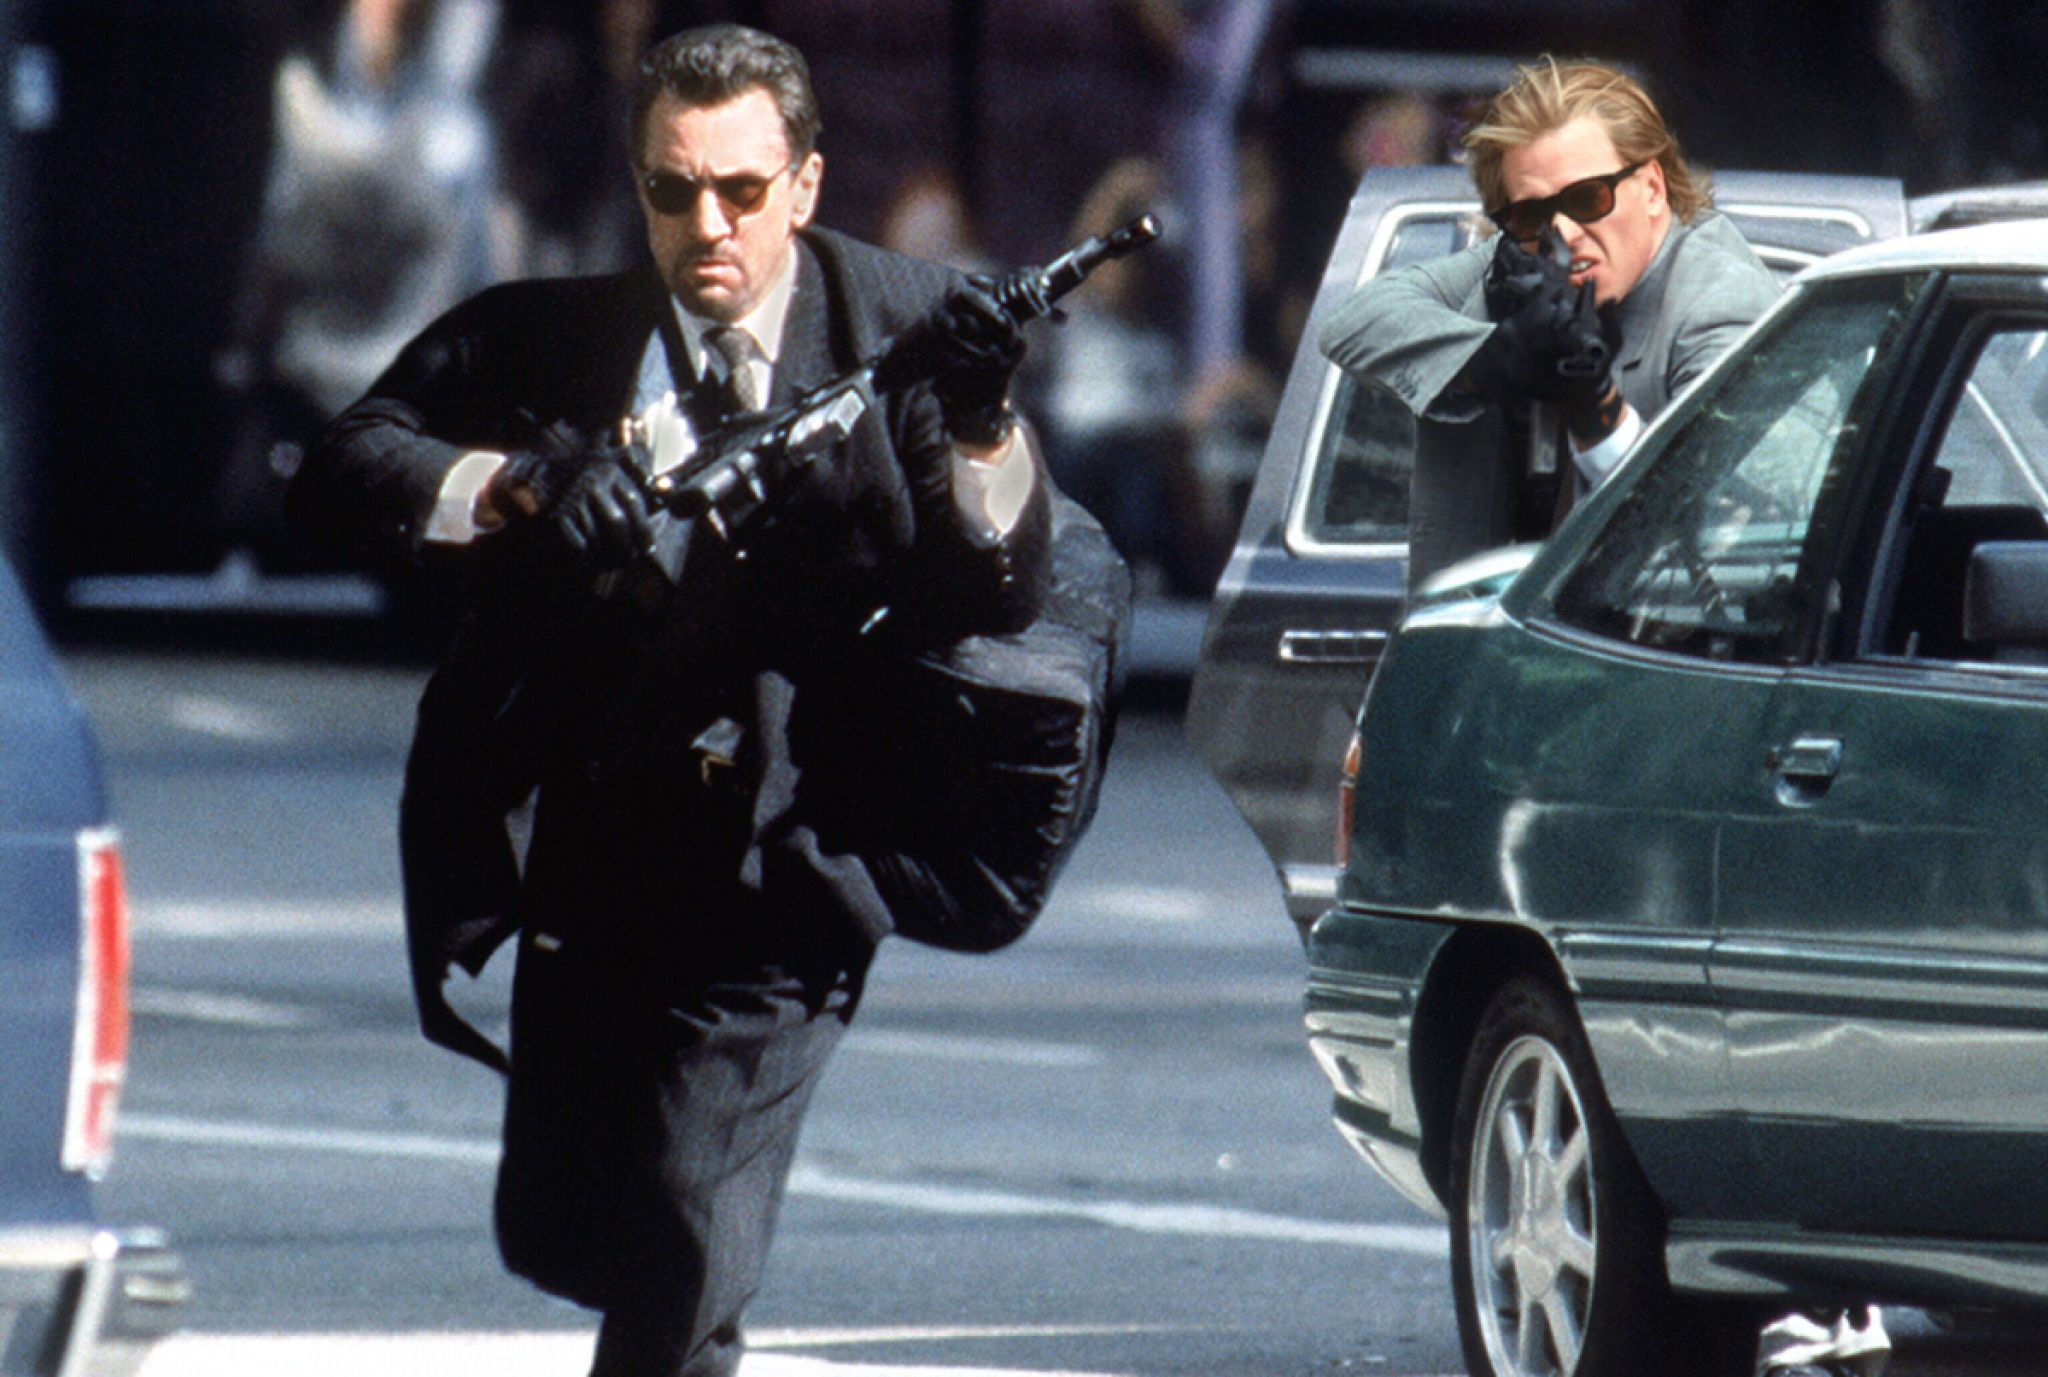 A man in a all black suit mid run carrying a gun and wearing sunglasses